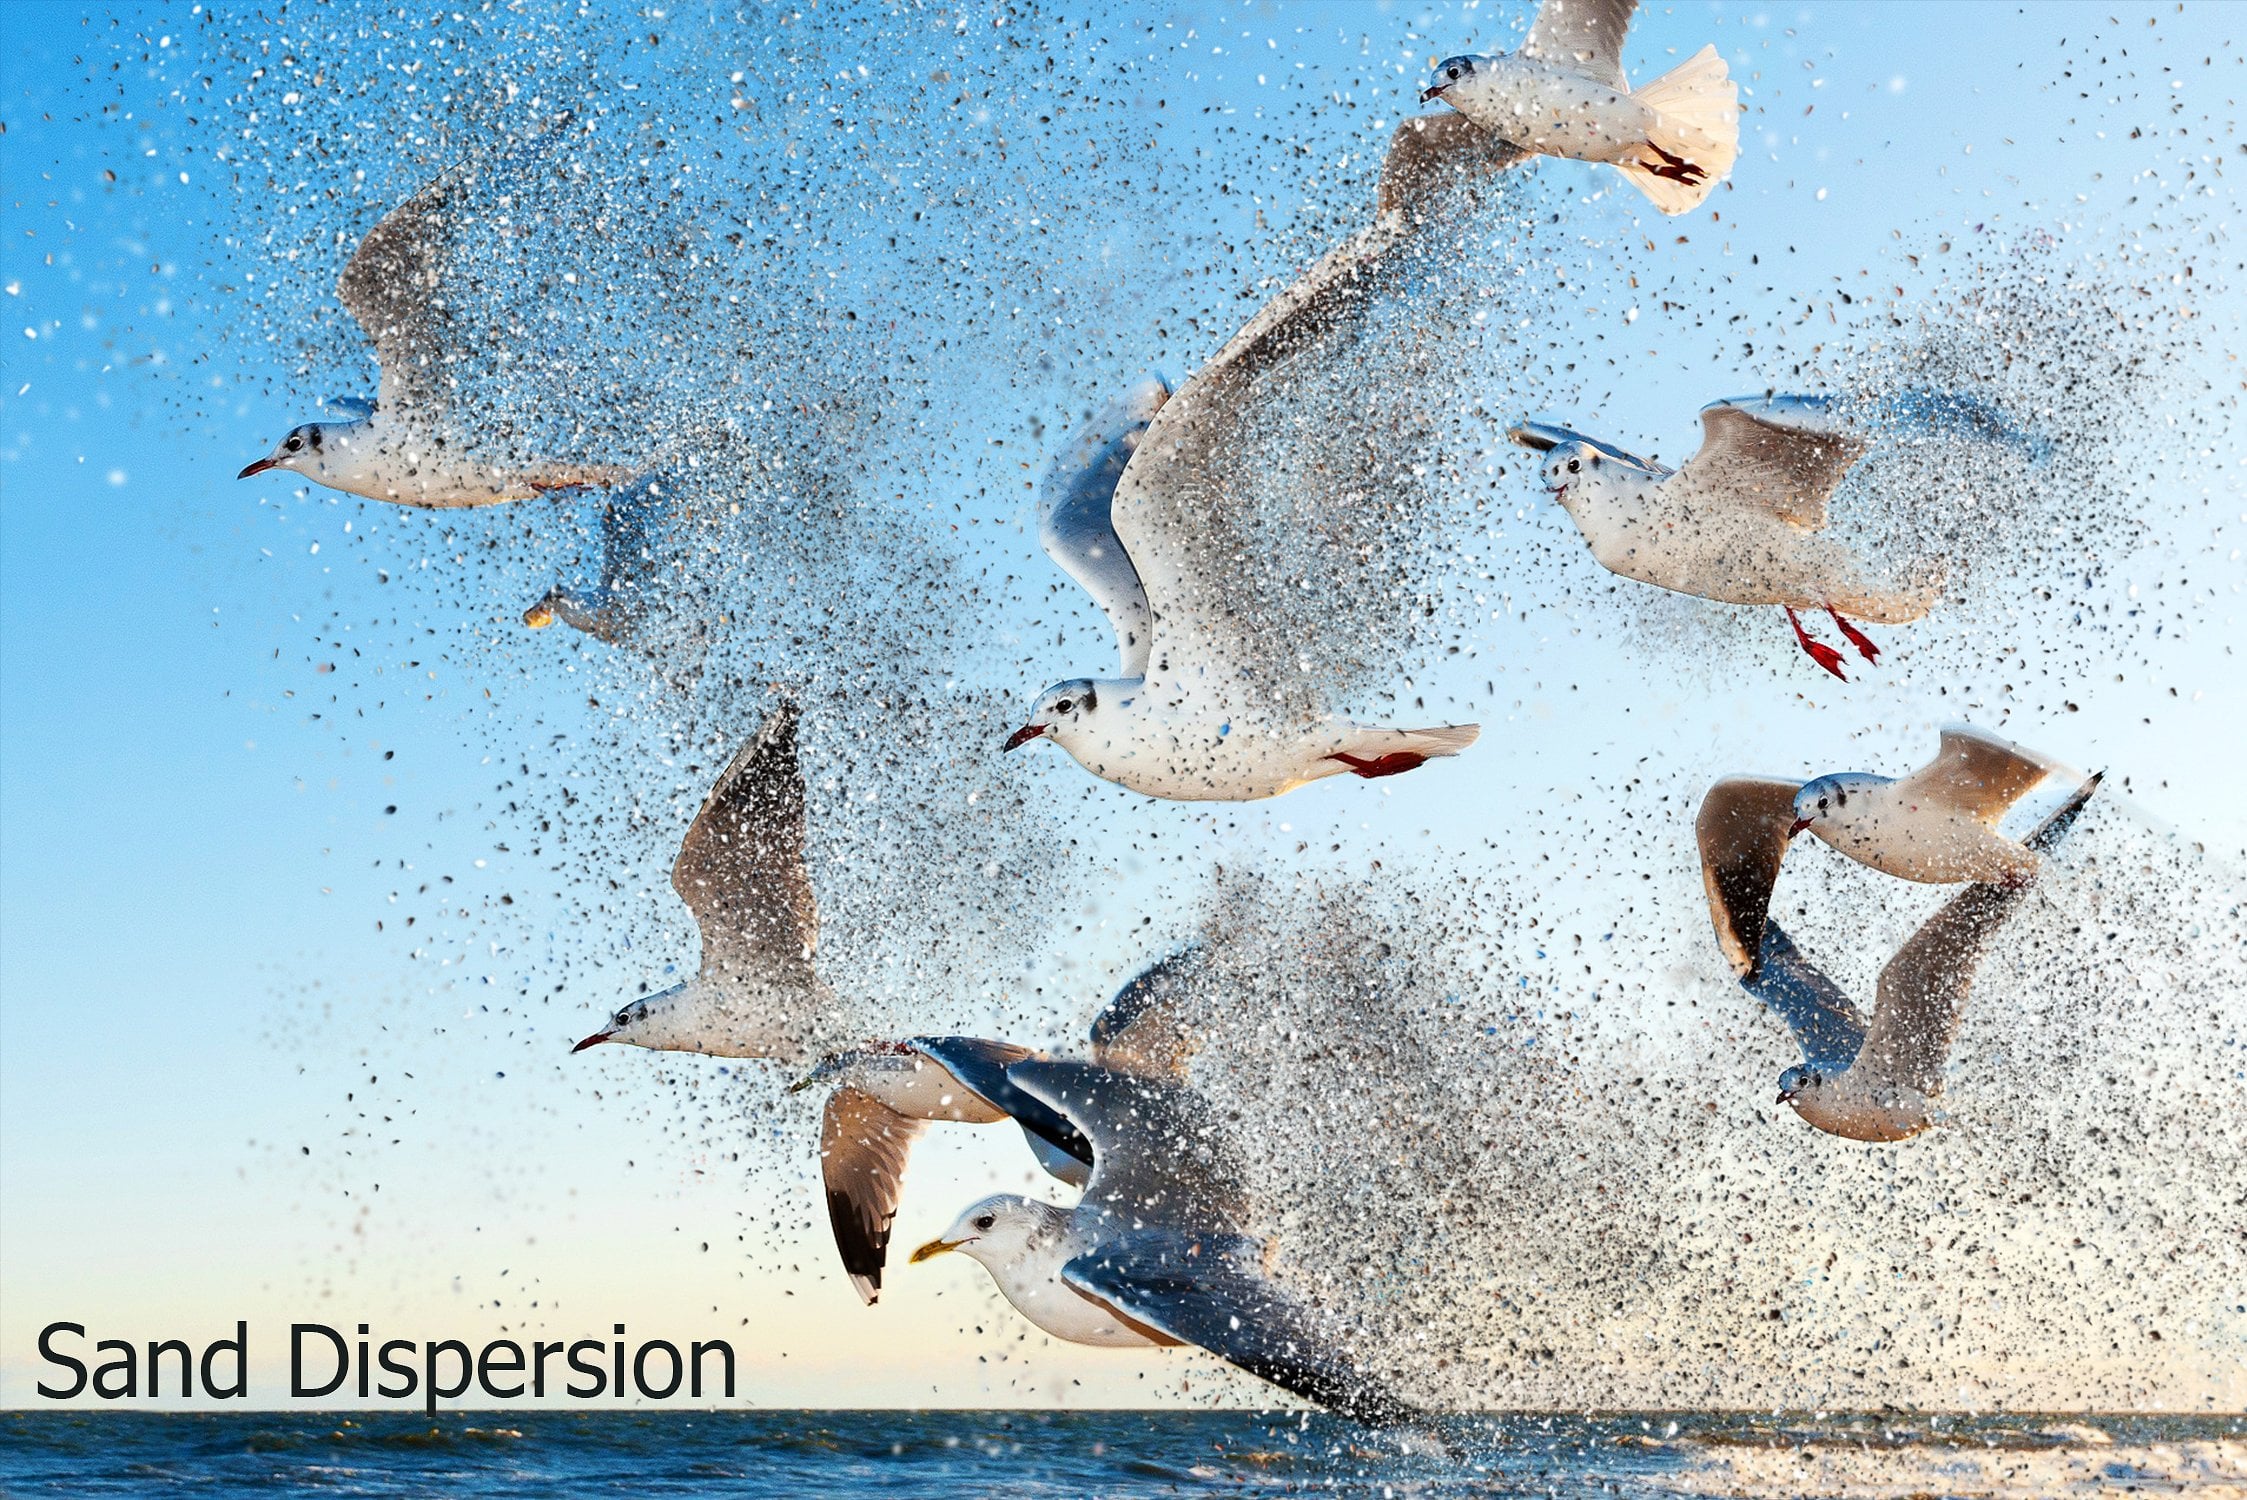 A flock of seagulls took off from the water and spread the water across the frame with their wings.